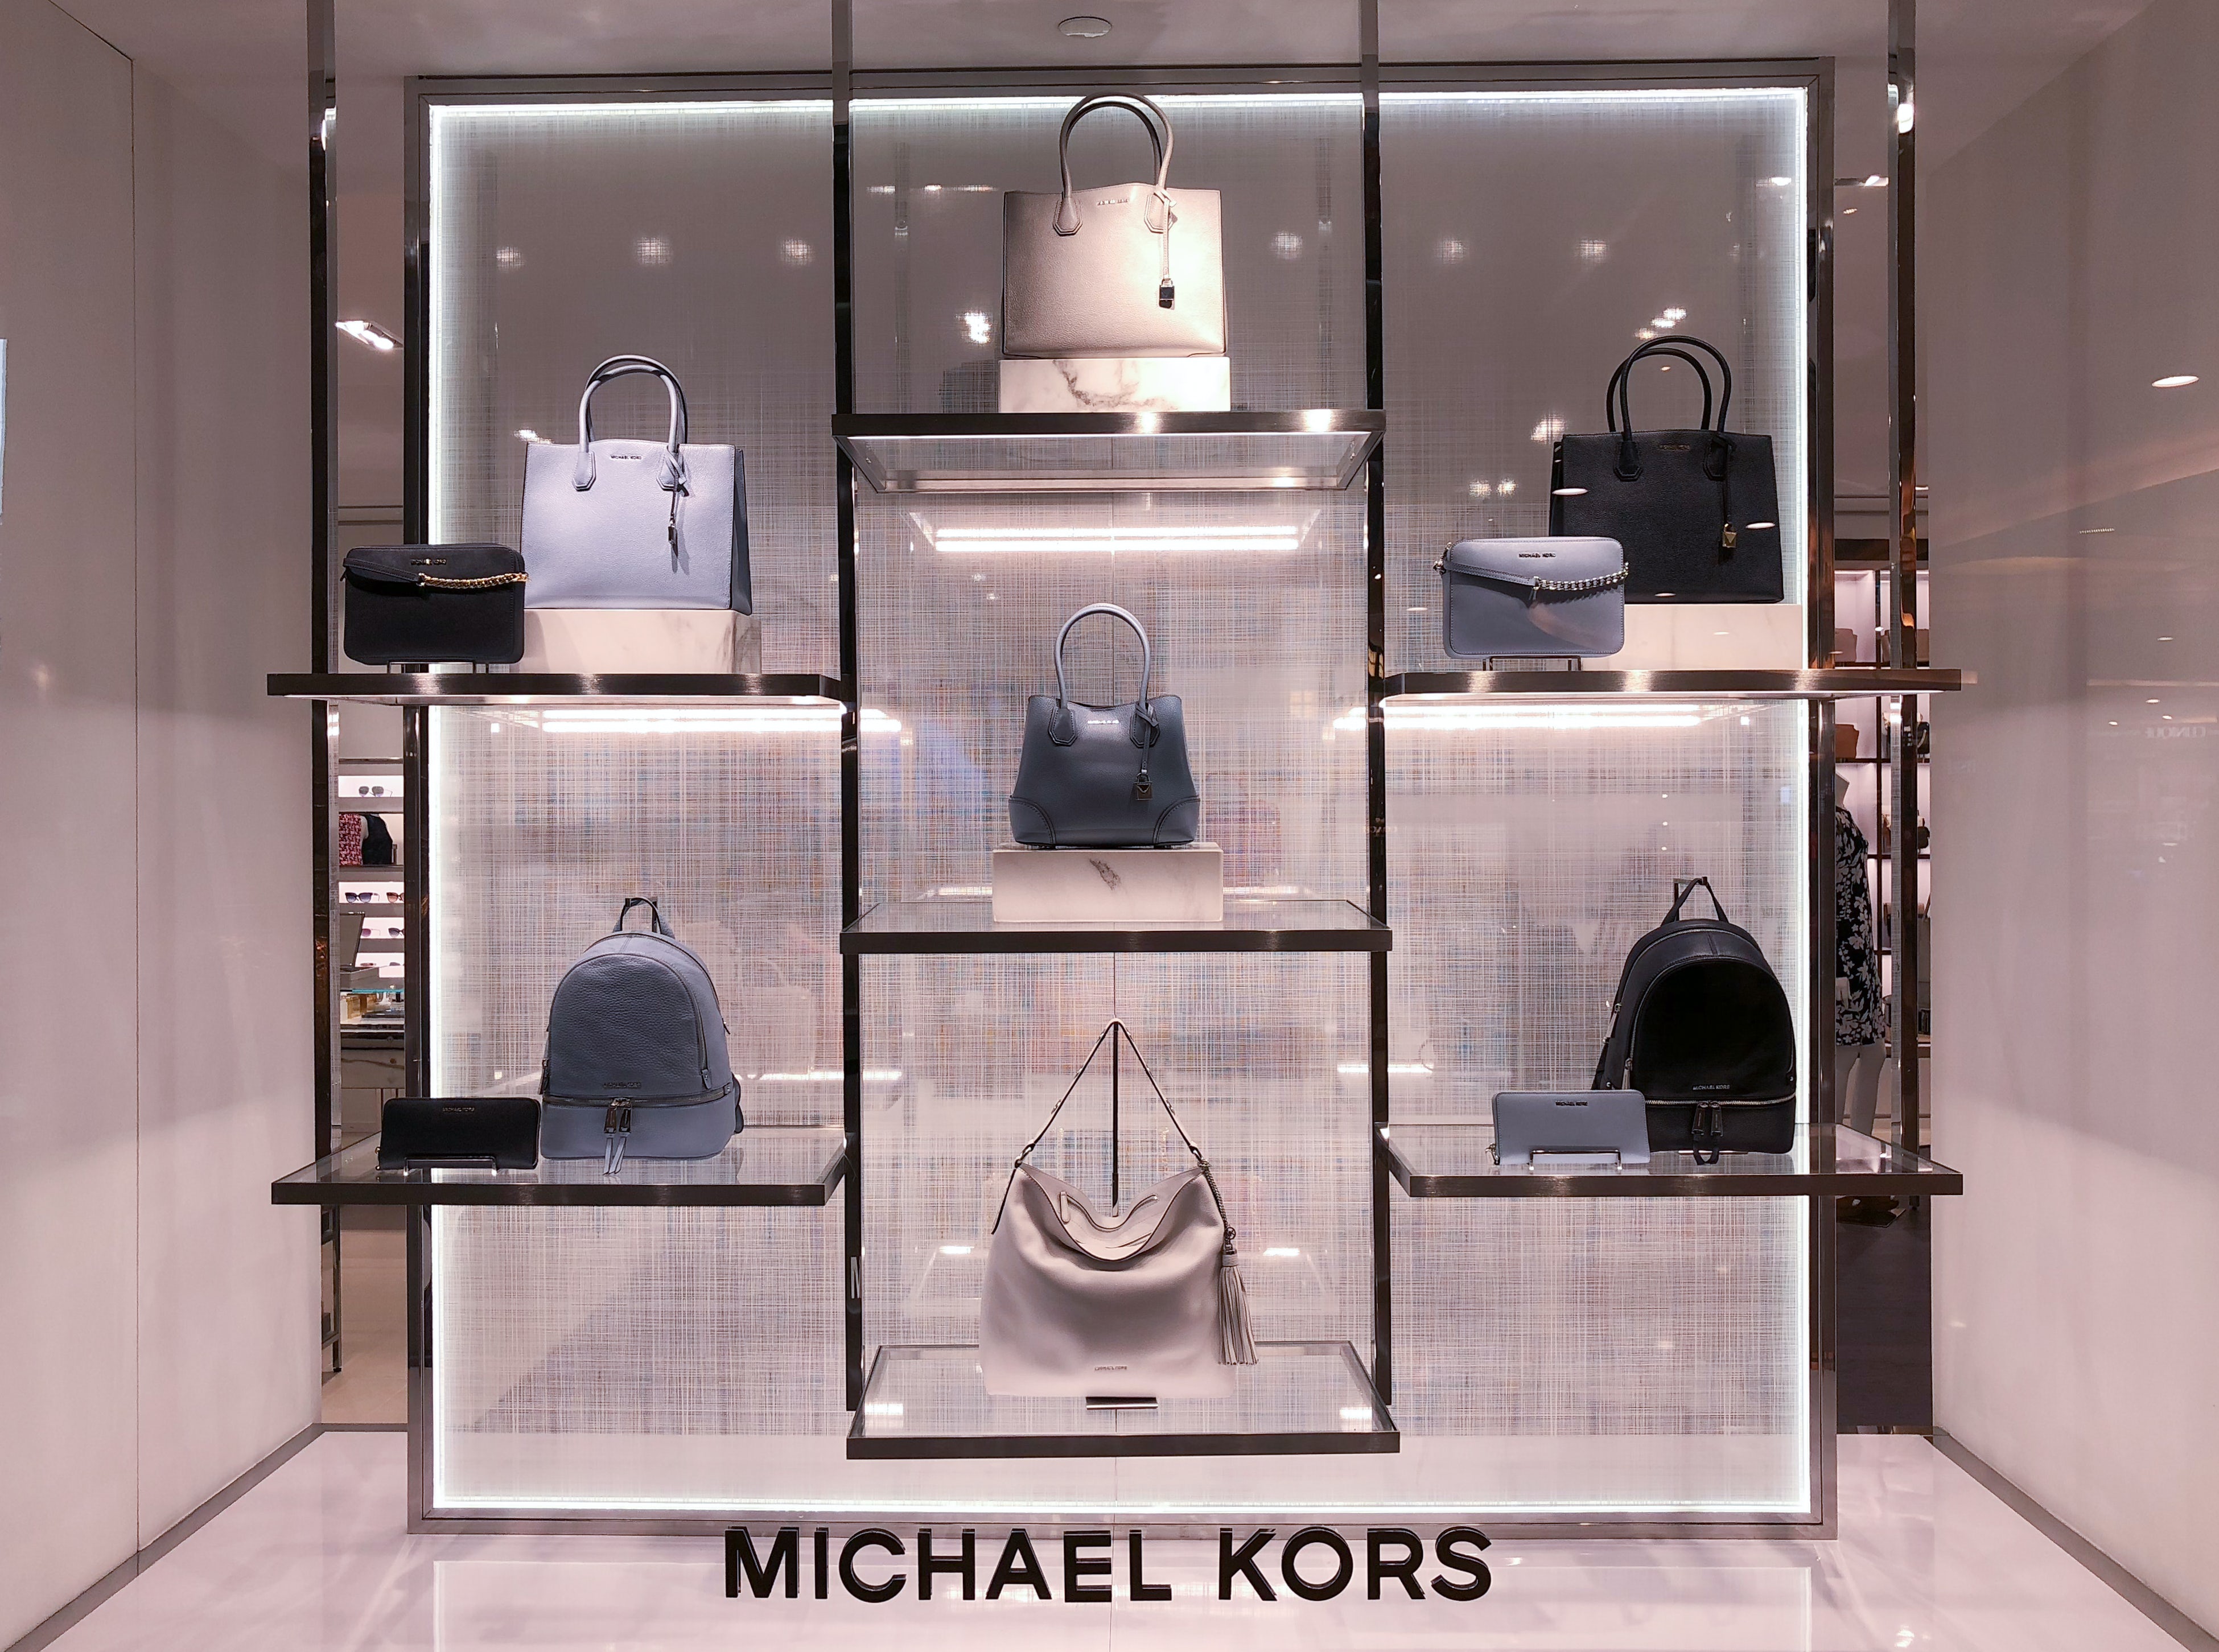 Michael Kors Is the Latest Brand to Depart from the Fashion Calendar | BoF